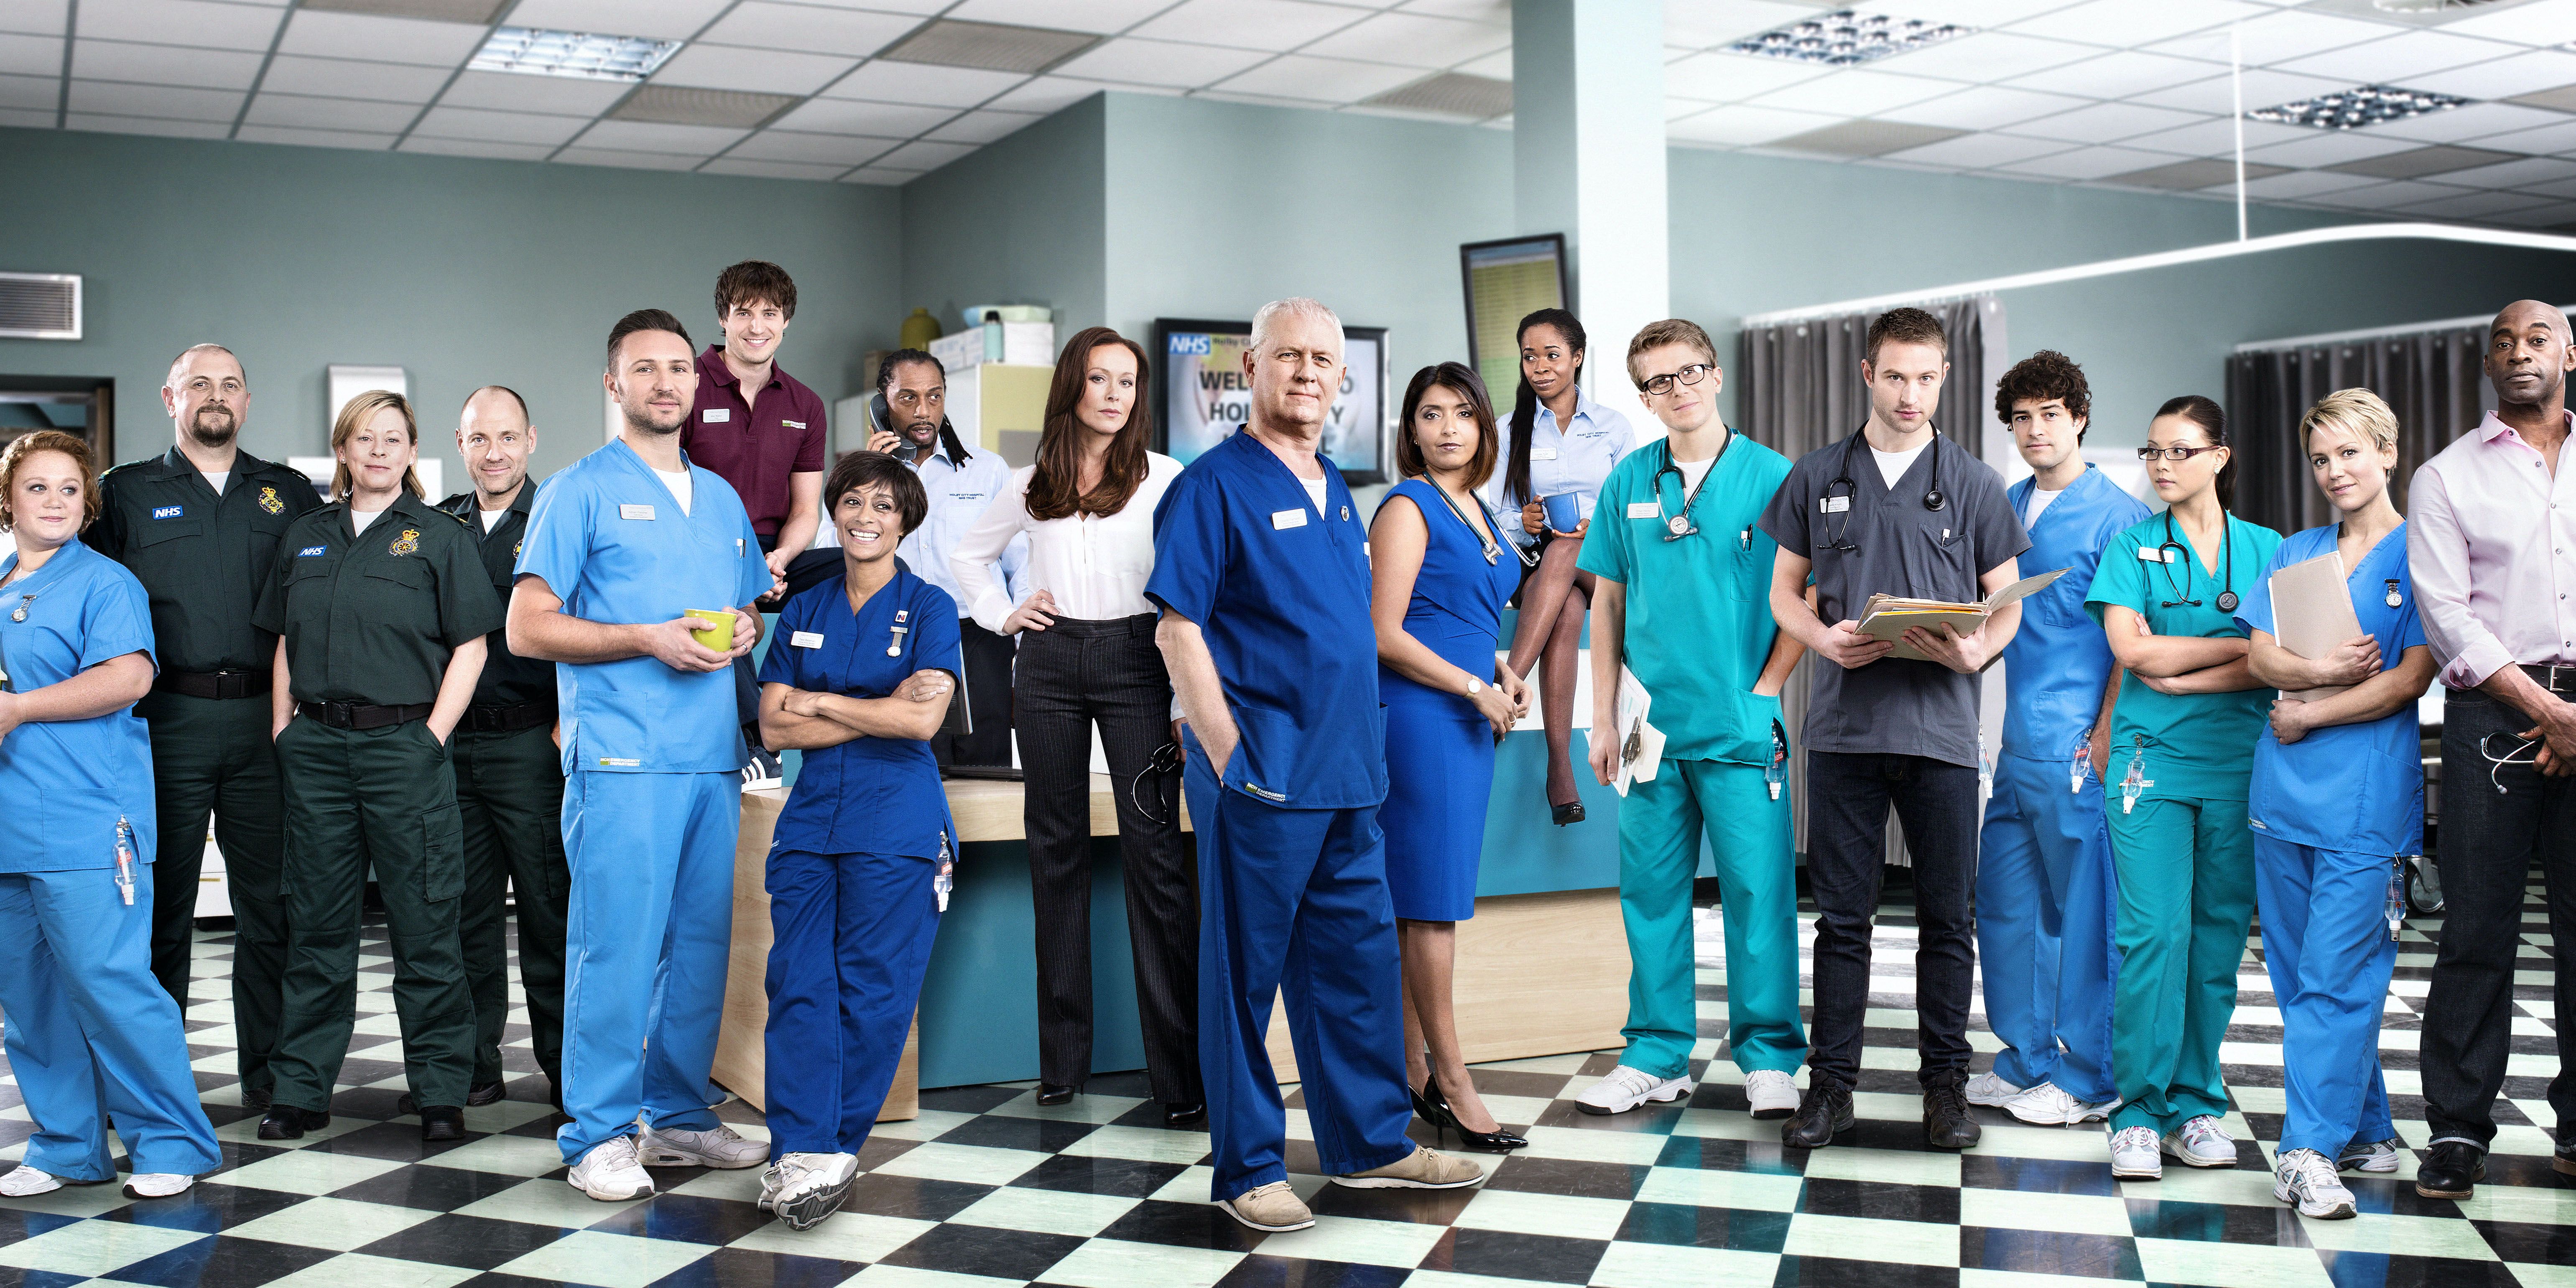 Casualty Series 28 Promo image of main cast lined up in the hospital